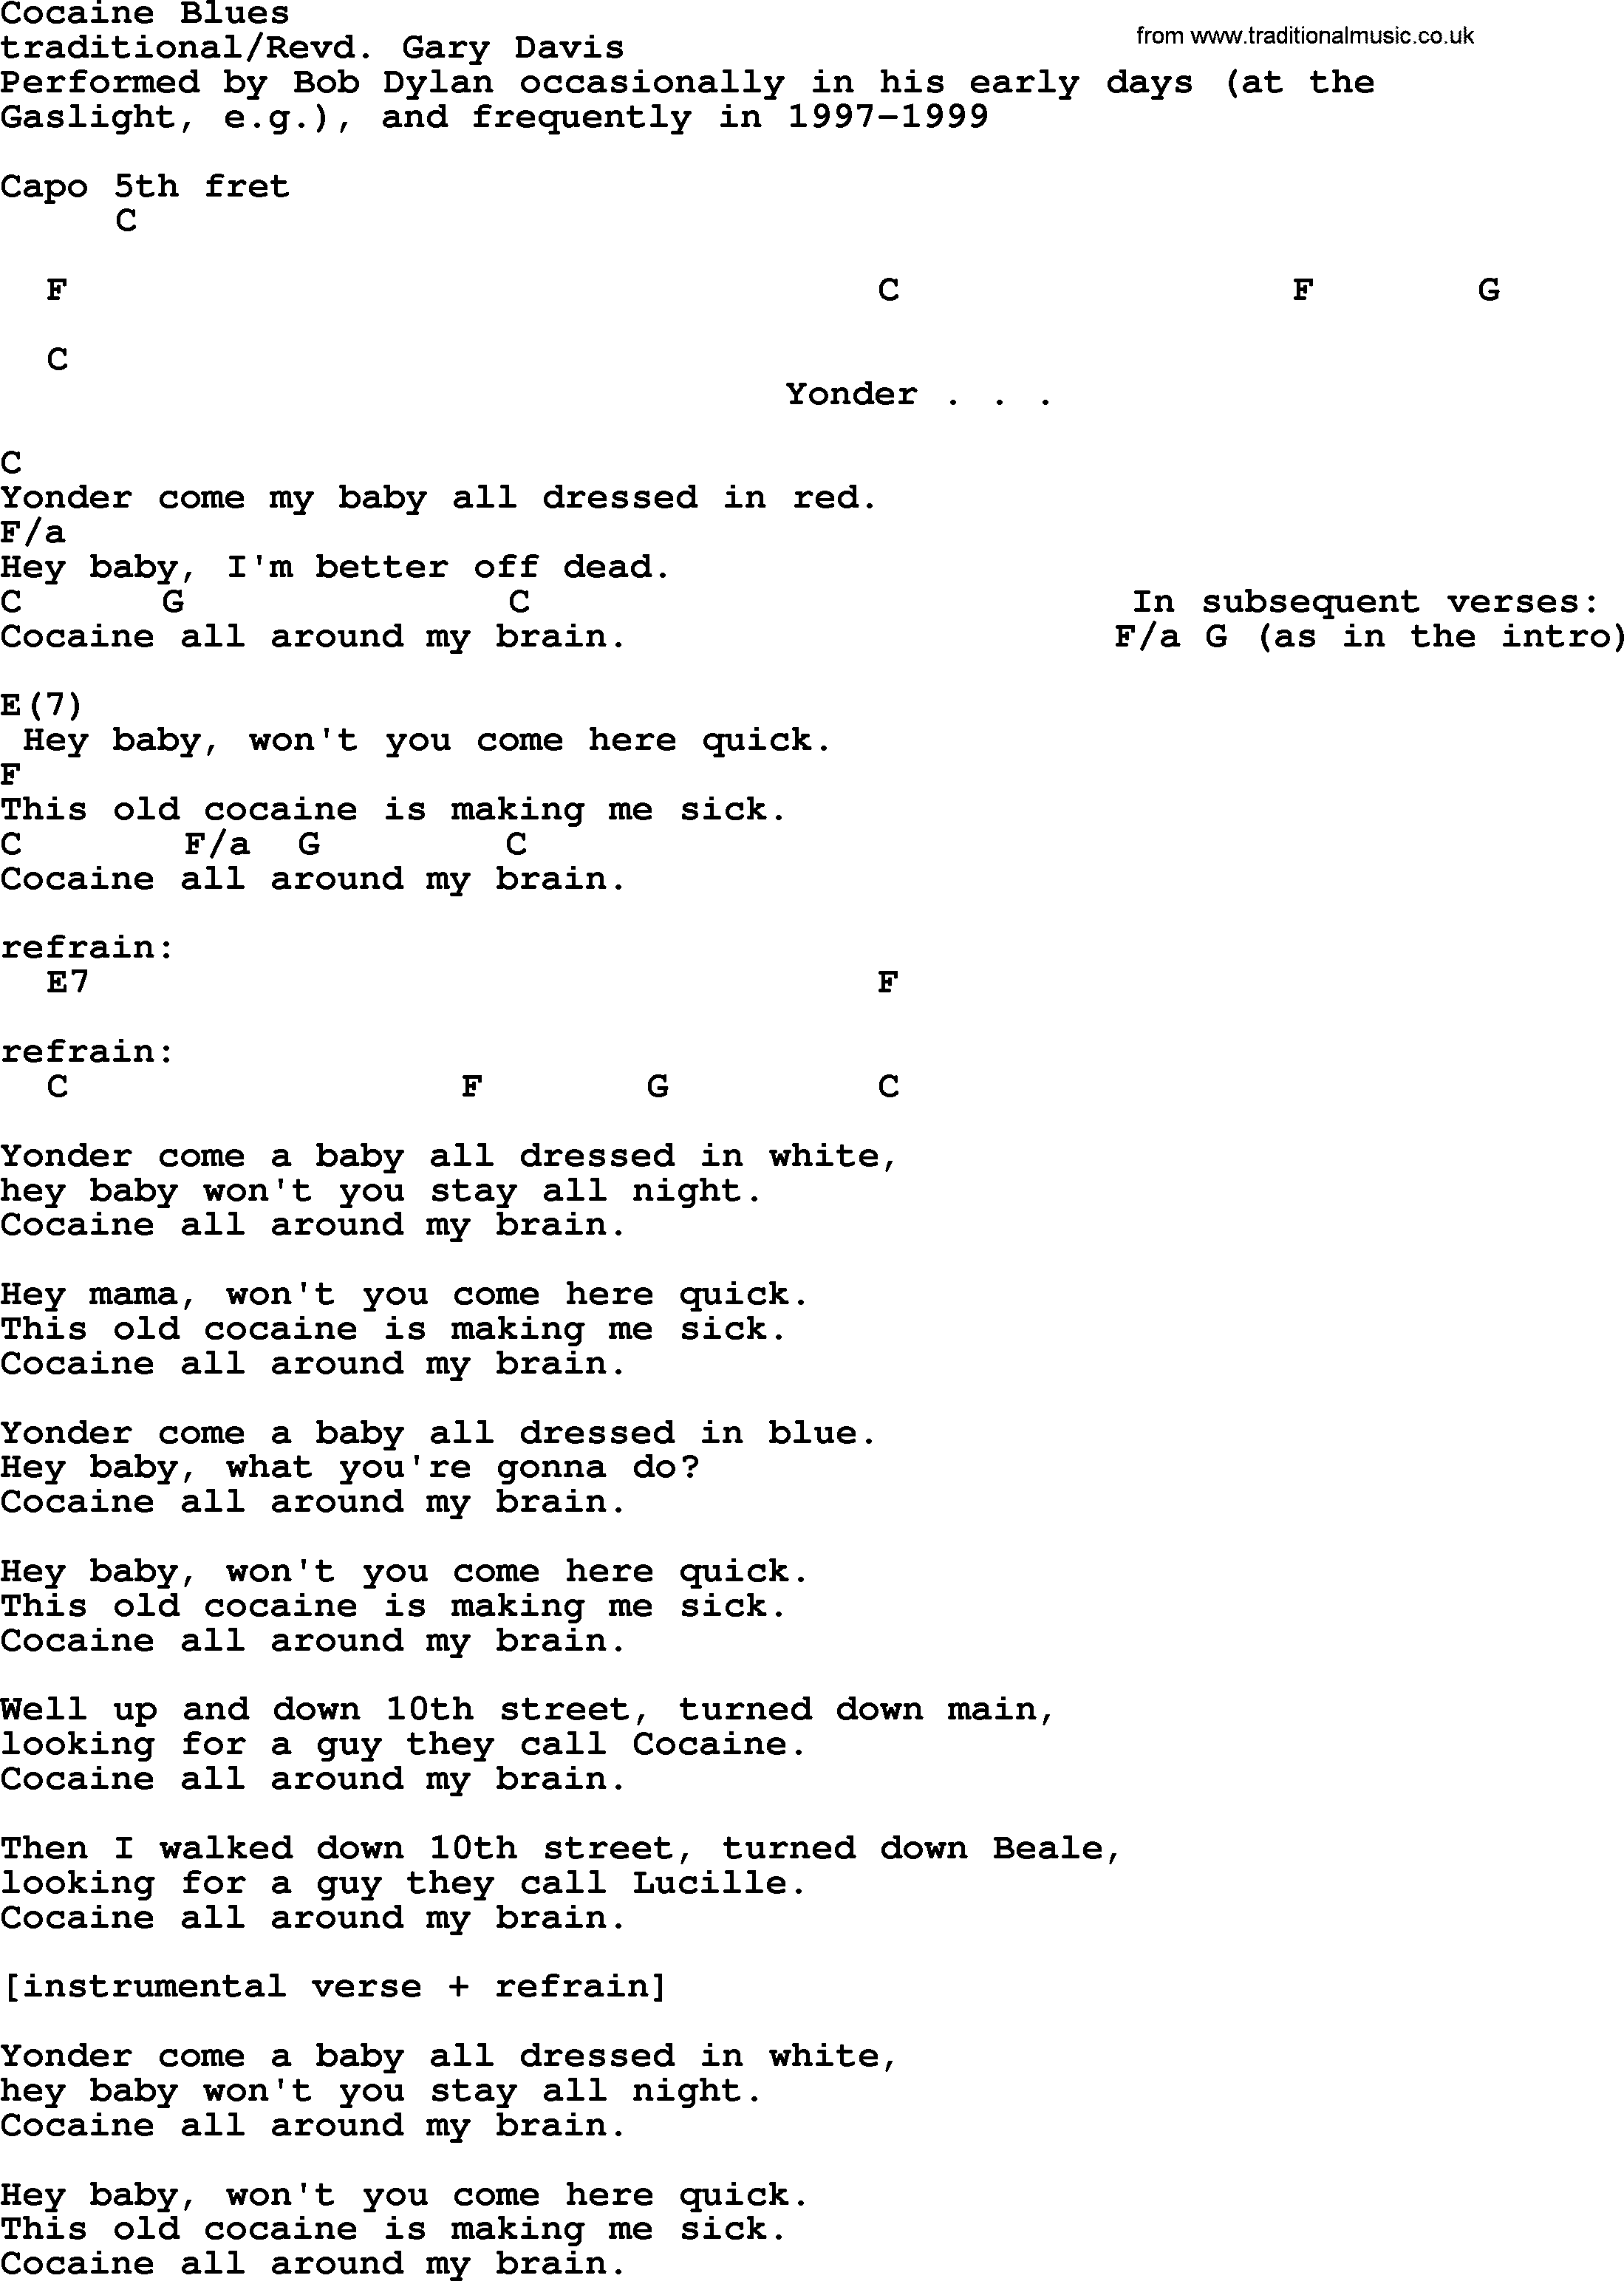 Bob Dylan song, lyrics with chords - Cocaine Blues